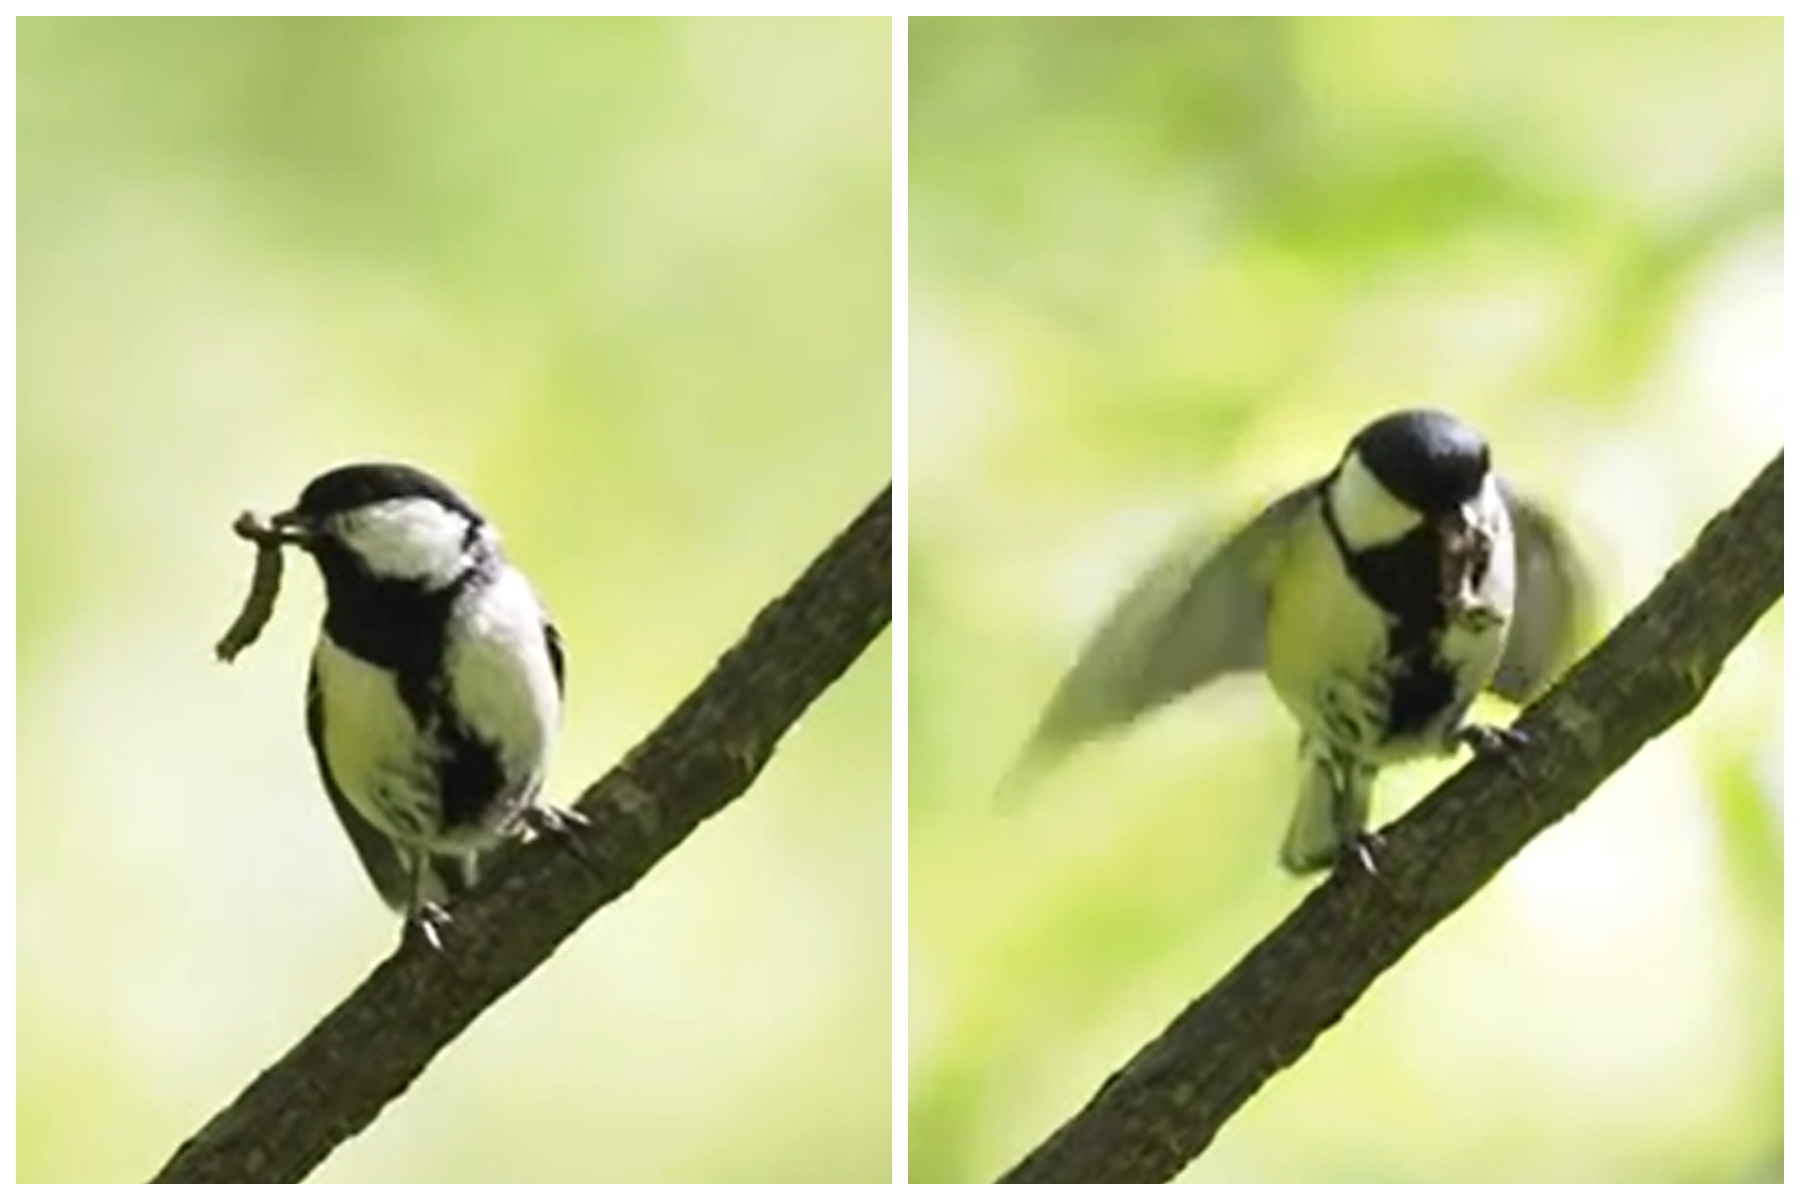 QnA VBage 'Fascinating' Polite Little Bird Uses Wing Gesture To Say 'After You'